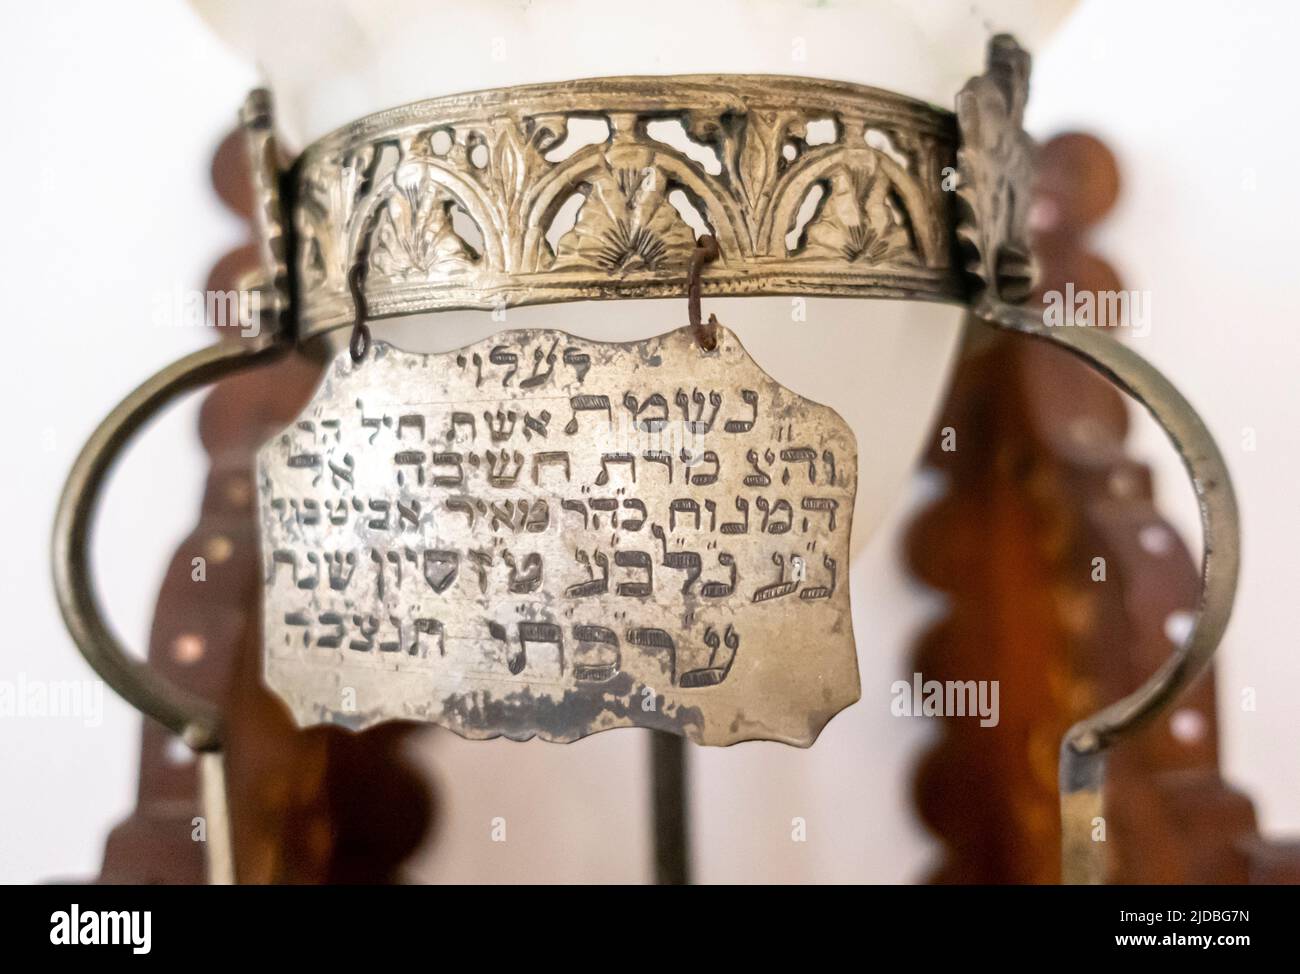 Hebrew dedication on Ner Tamid, sanctuary lamp at Bayt Dakira, Museum of  Jewish culture and Judaism in Essaouira, Morocco Stock Photo - Alamy